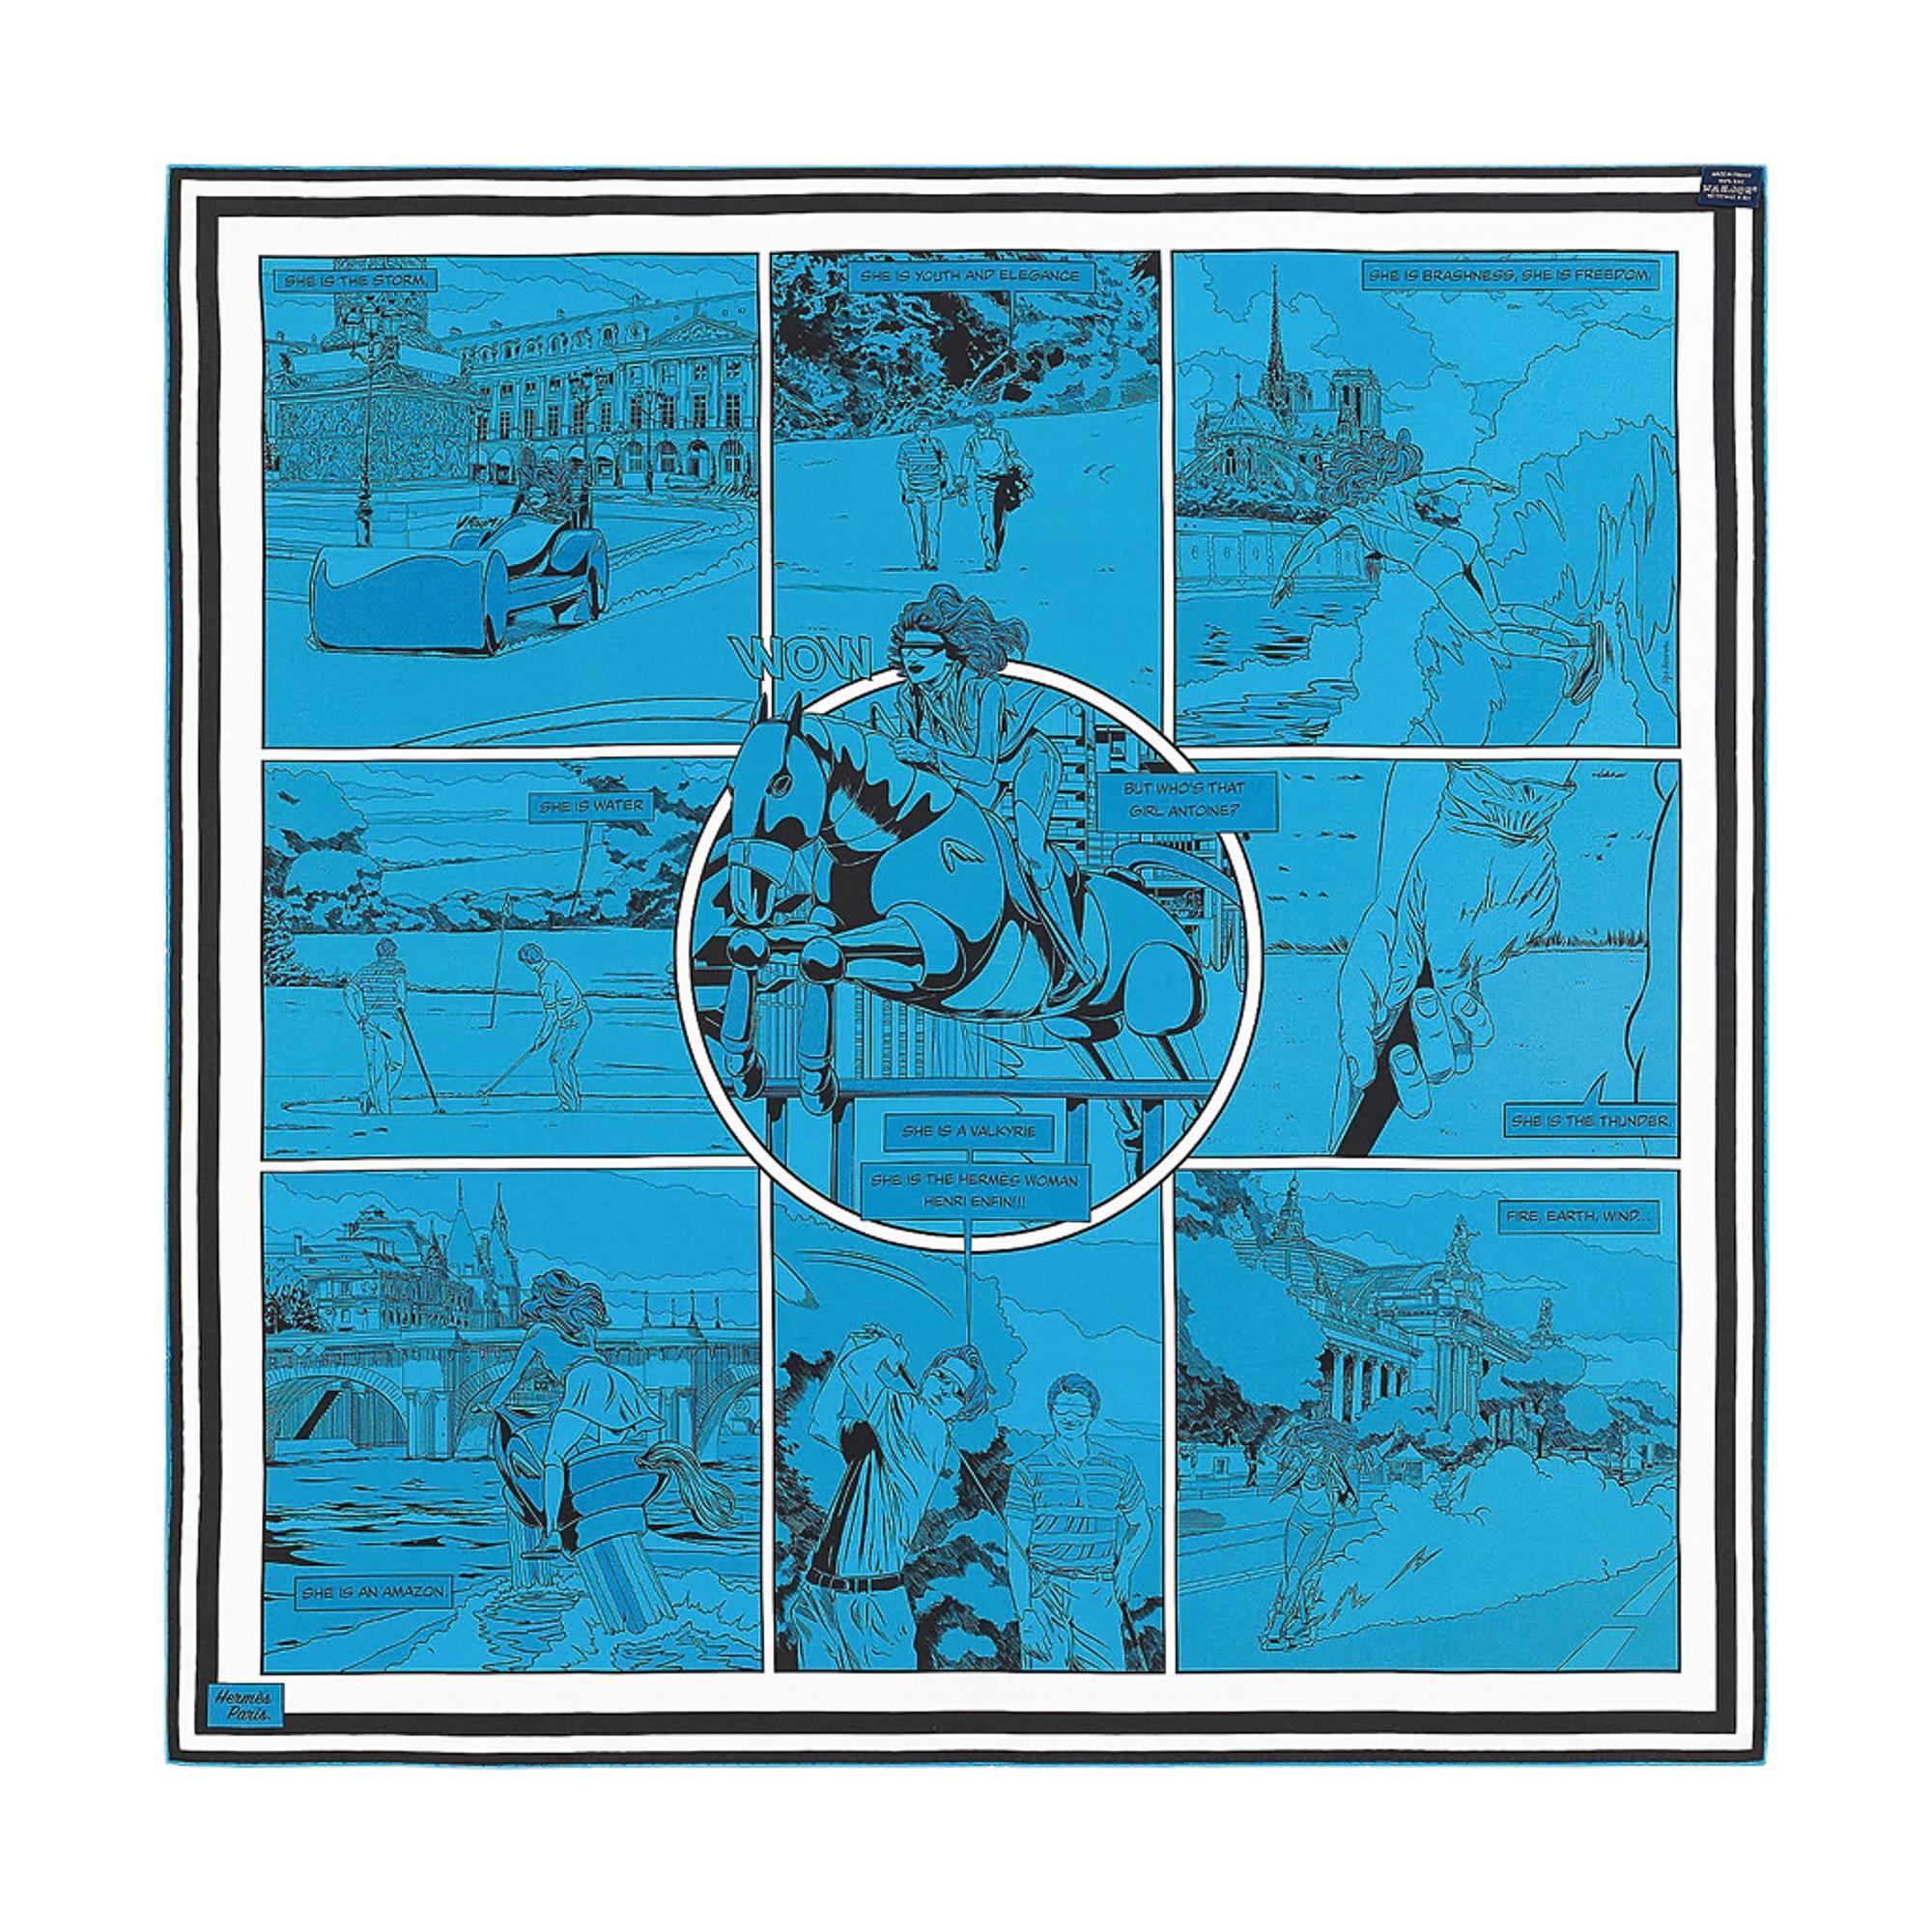 Mightychic offers an Hermes Wow Double Face Silk Twill scarf by Ugo Bienvenu.  
Featured in Bleu, Vert and Bleu Dur, the scarf depicts comic strip style characters.
The colorful side has dialog expressed in French and the monochromatic blue side has